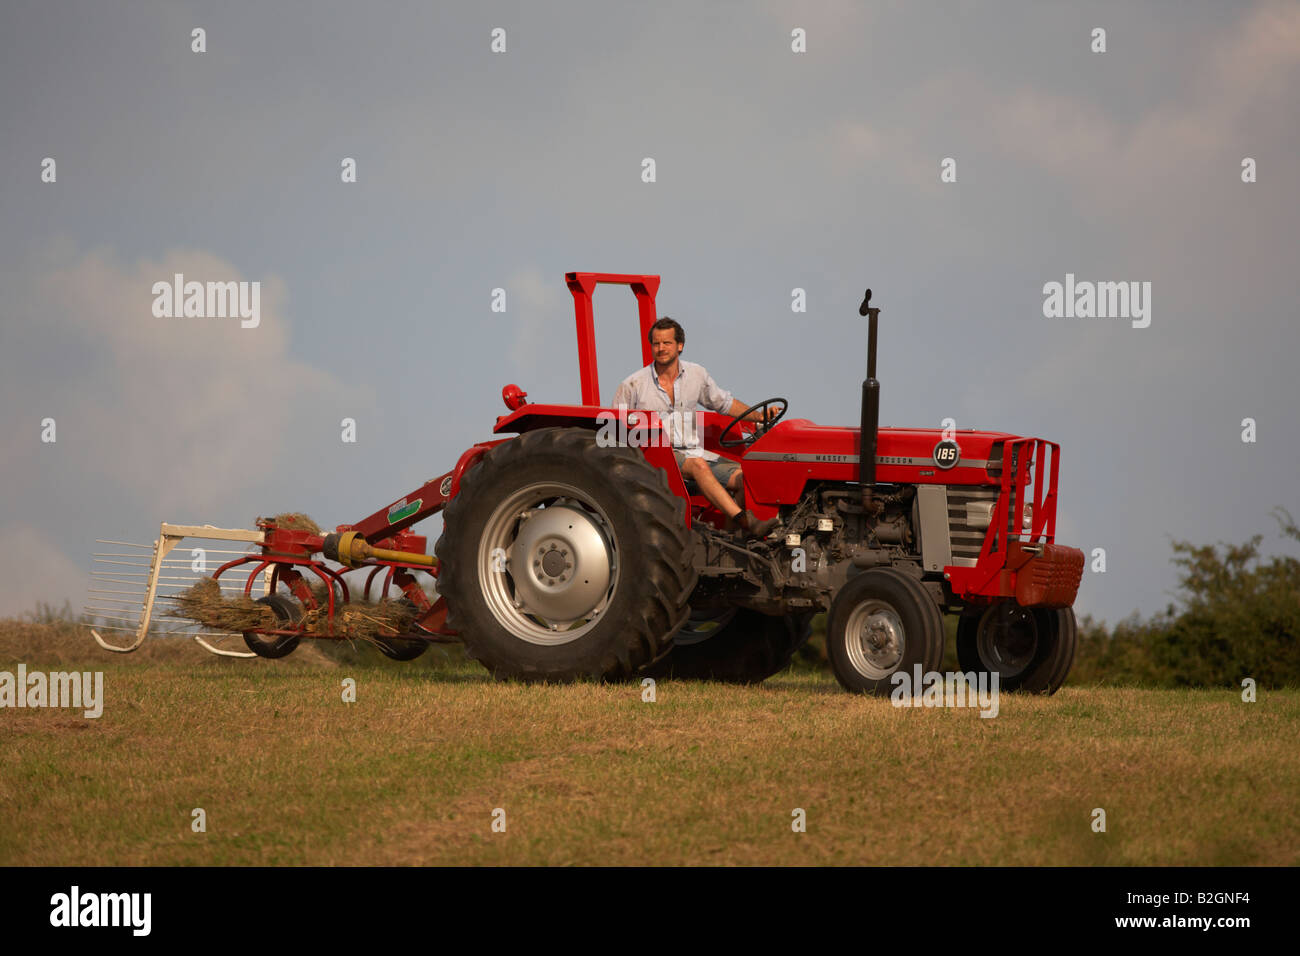 farmer sitting on a massey ferguson 185 old tractor pulling a haymaker attachment in a field making hay county down Stock Photo